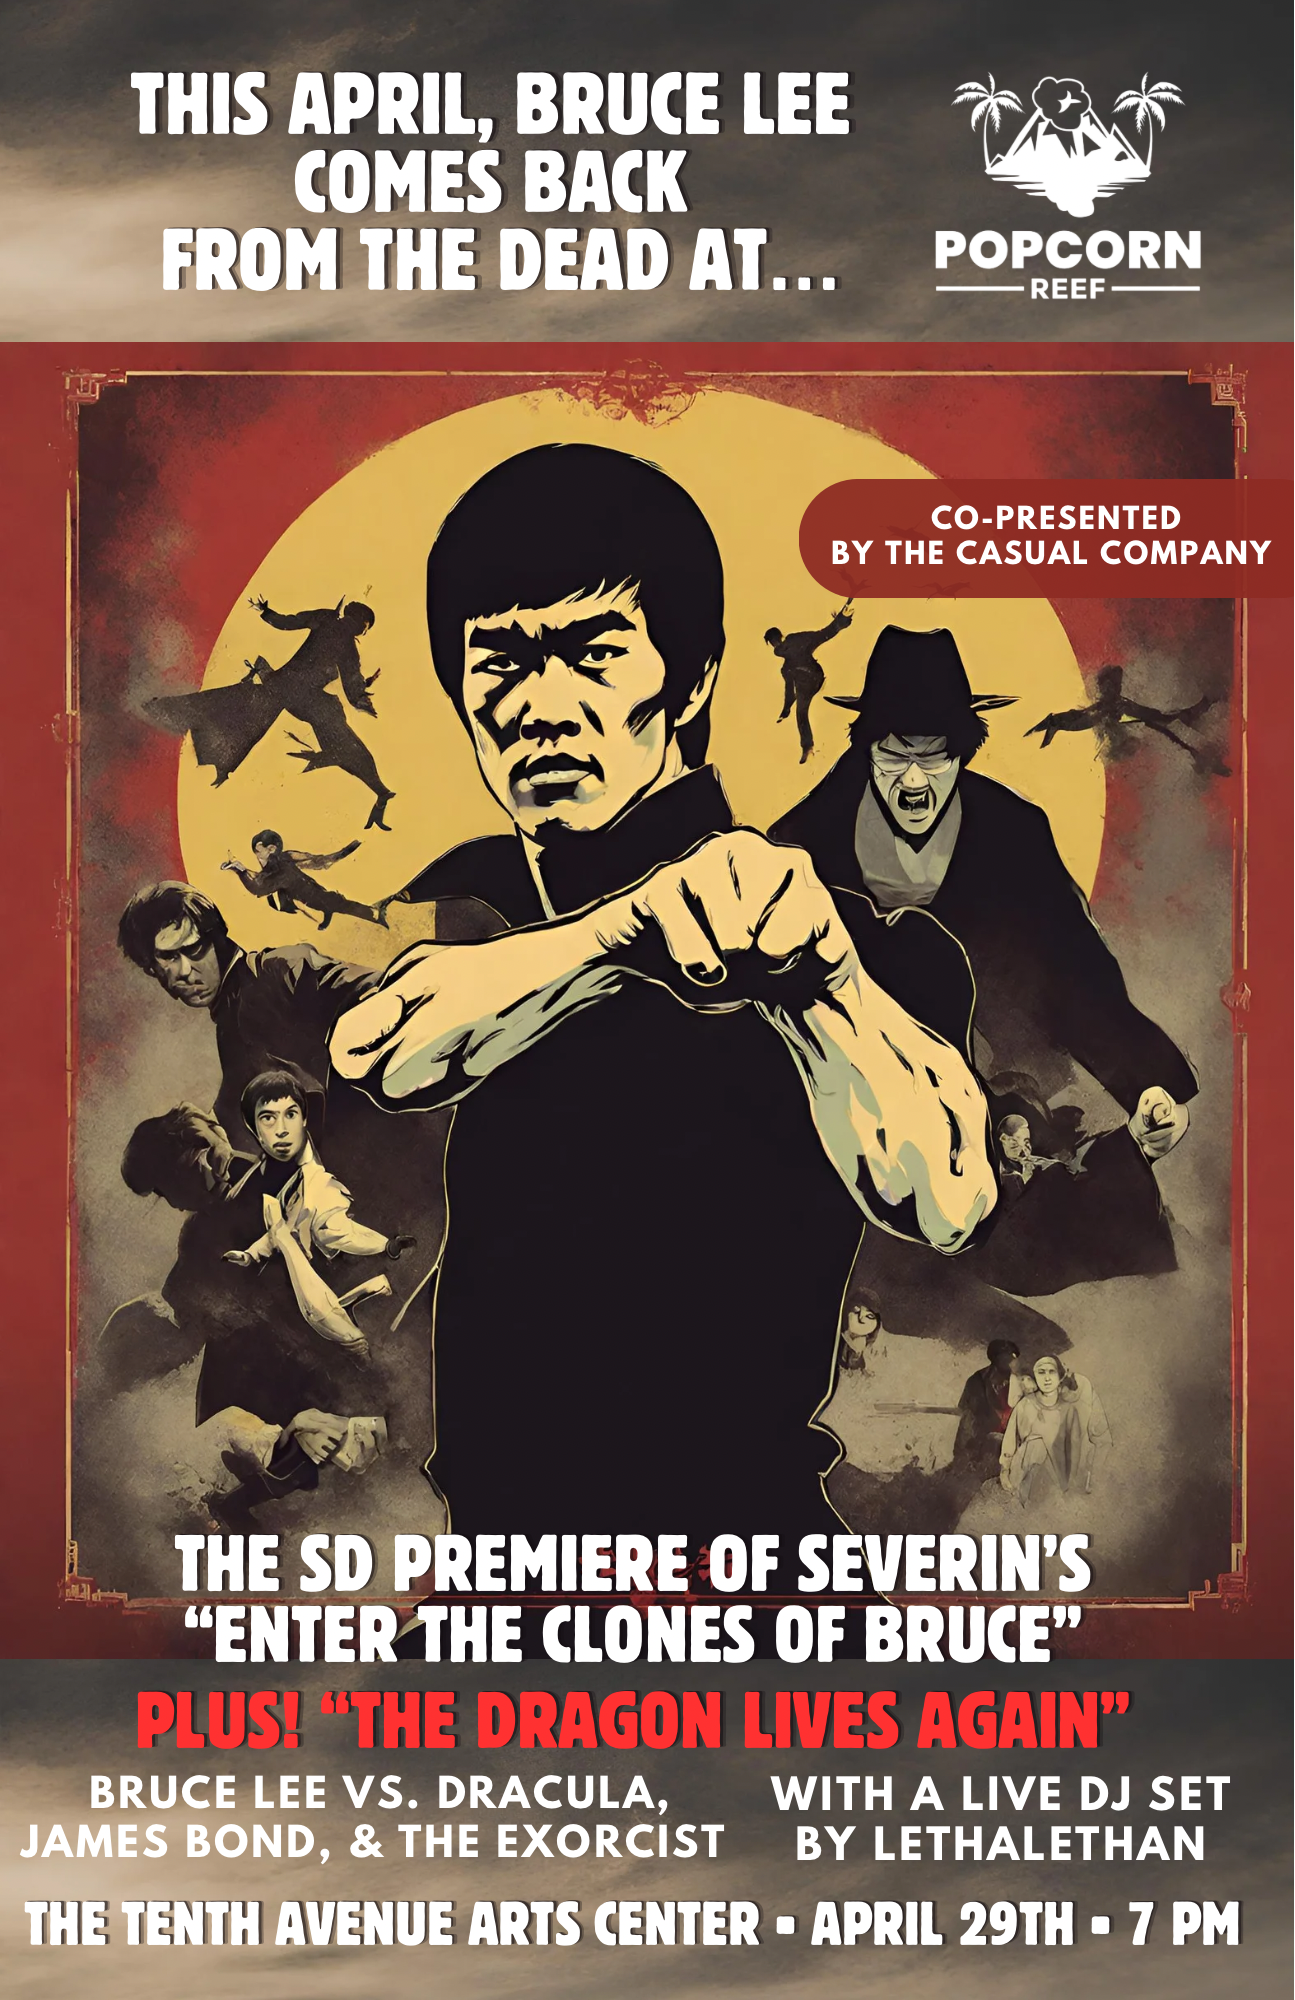 Bruce Lee Comes Back From The Dead Night at Popcorn Reef, Featuring a Live DJ Set by LethalEthan at The Tenth Ave Arts Center [4/29/24]